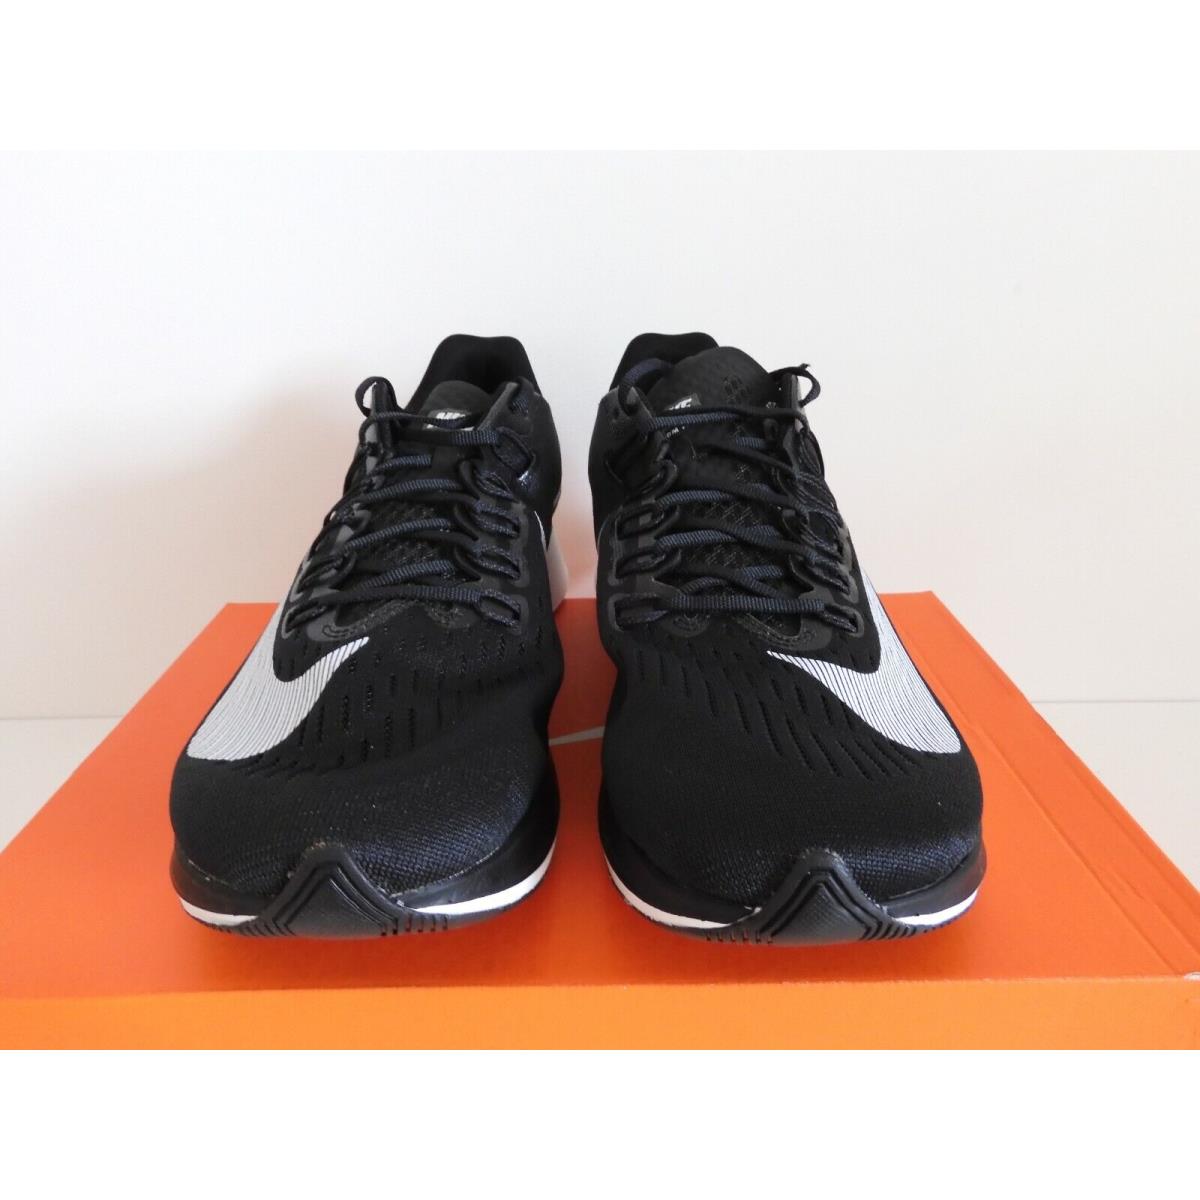 Nike shoes Zoom Fly - Black 1